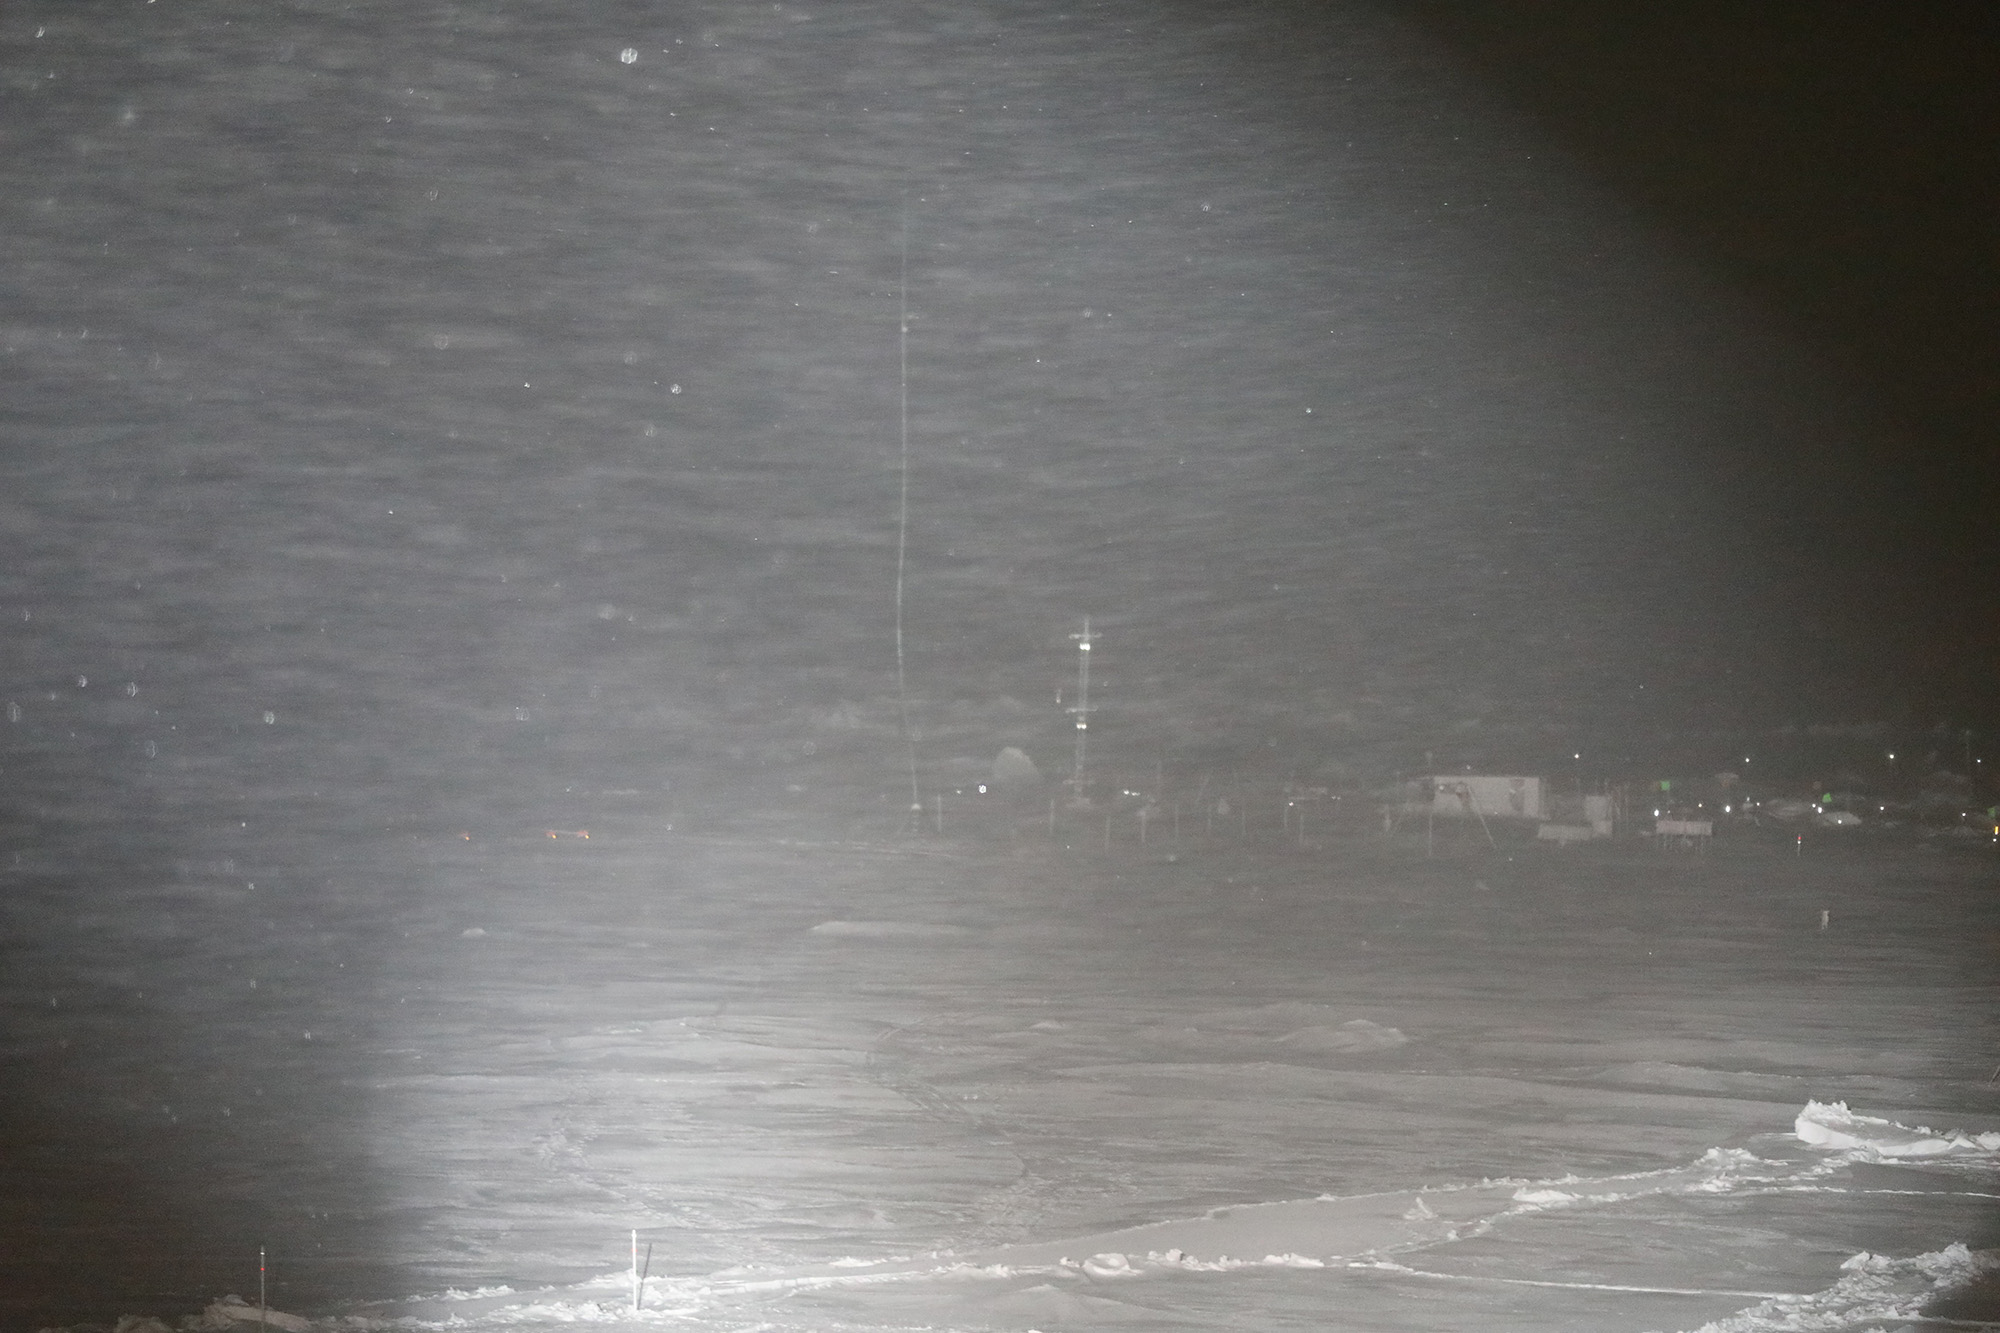 Blowing snow makes it difficult to see instruments on the sea ice during the MOSAiC expedition.